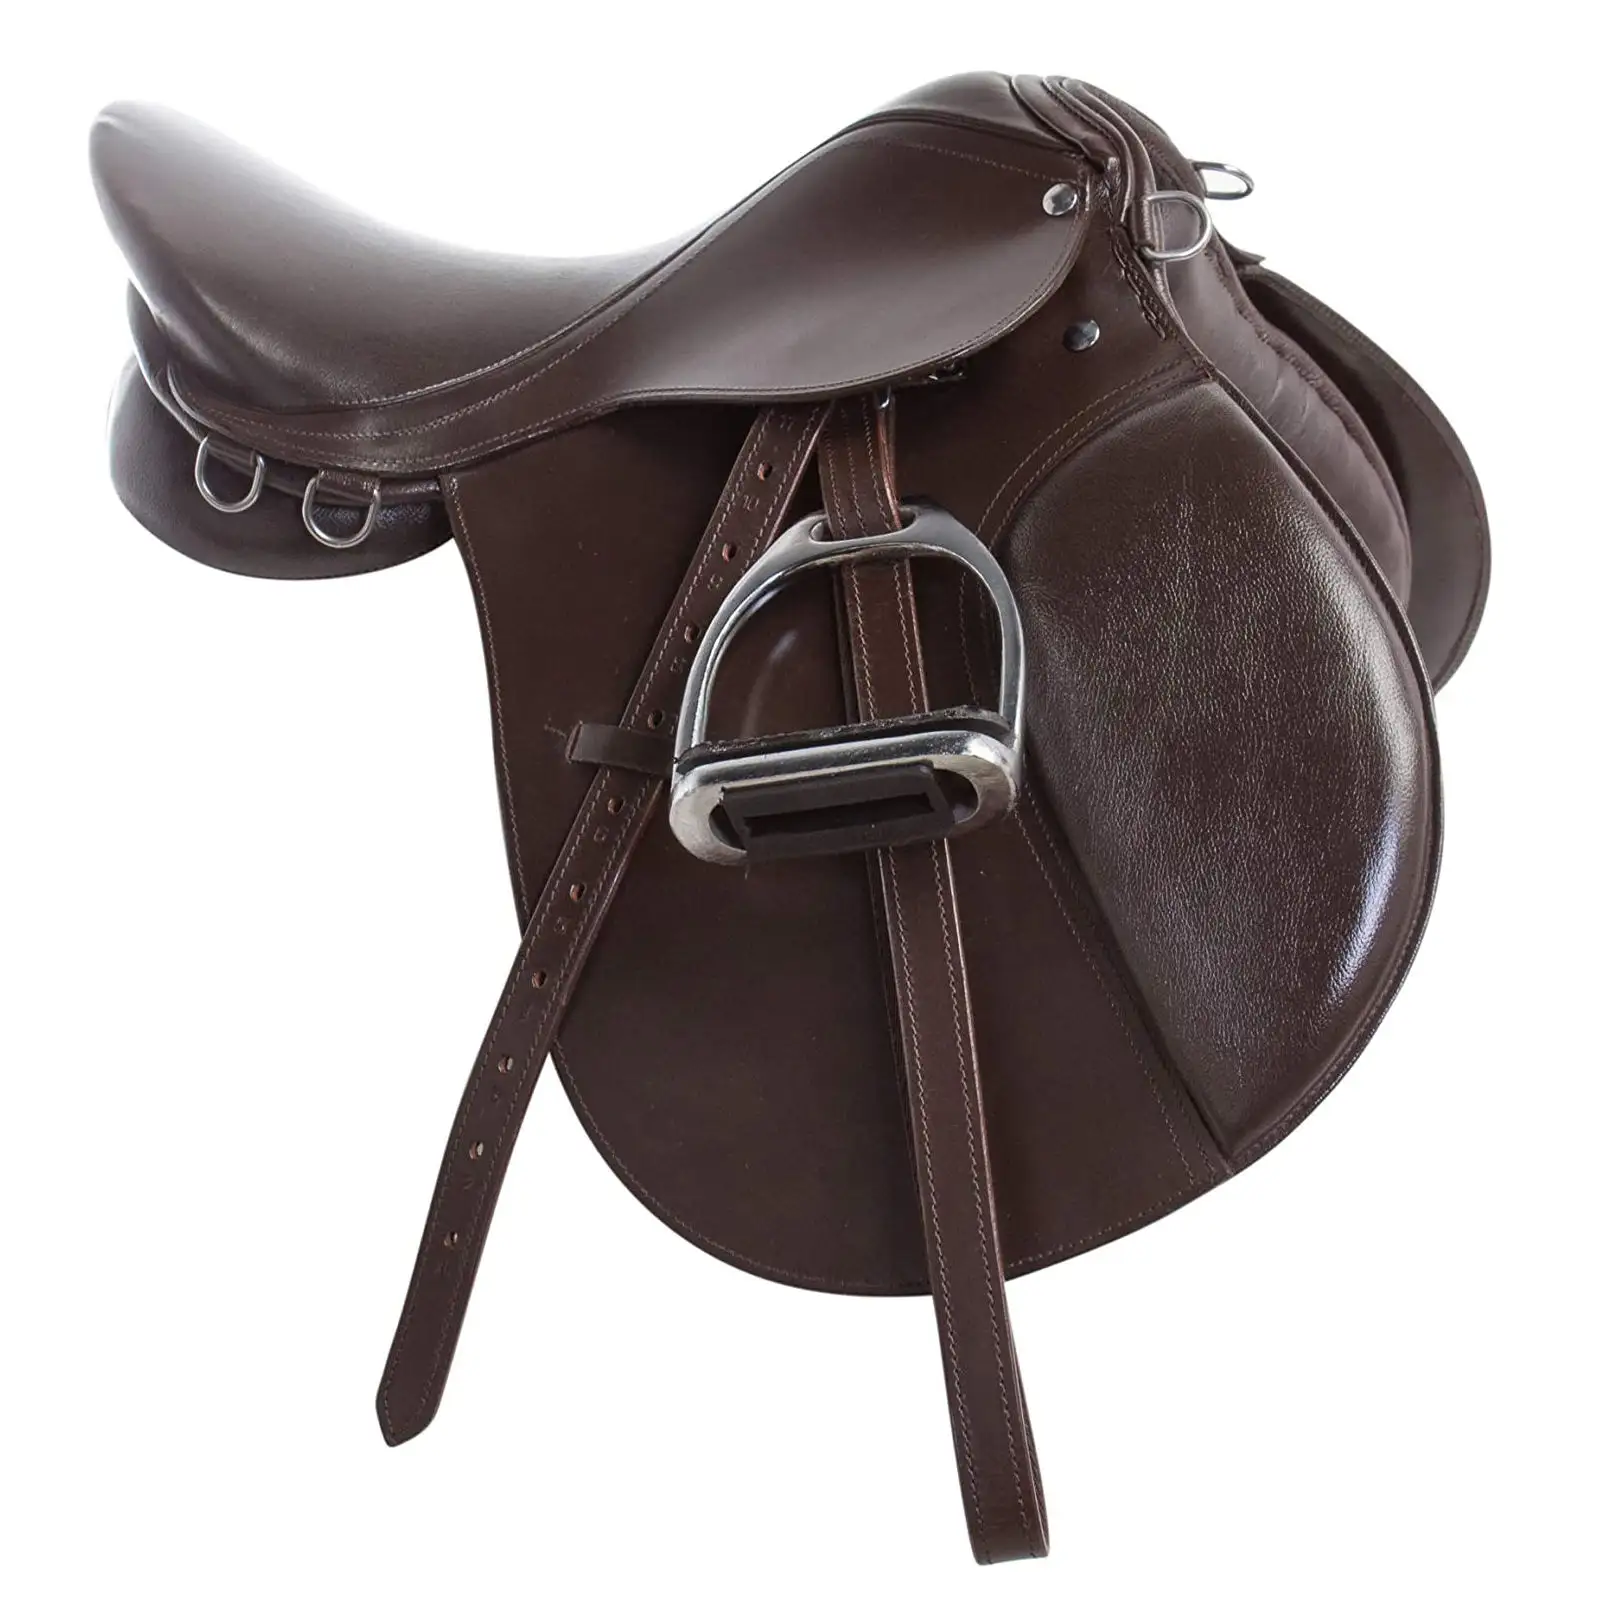 Wholesale Horse Riding Saddles Made With Cowhide Leather With OEM Services Horse Saddle Pads